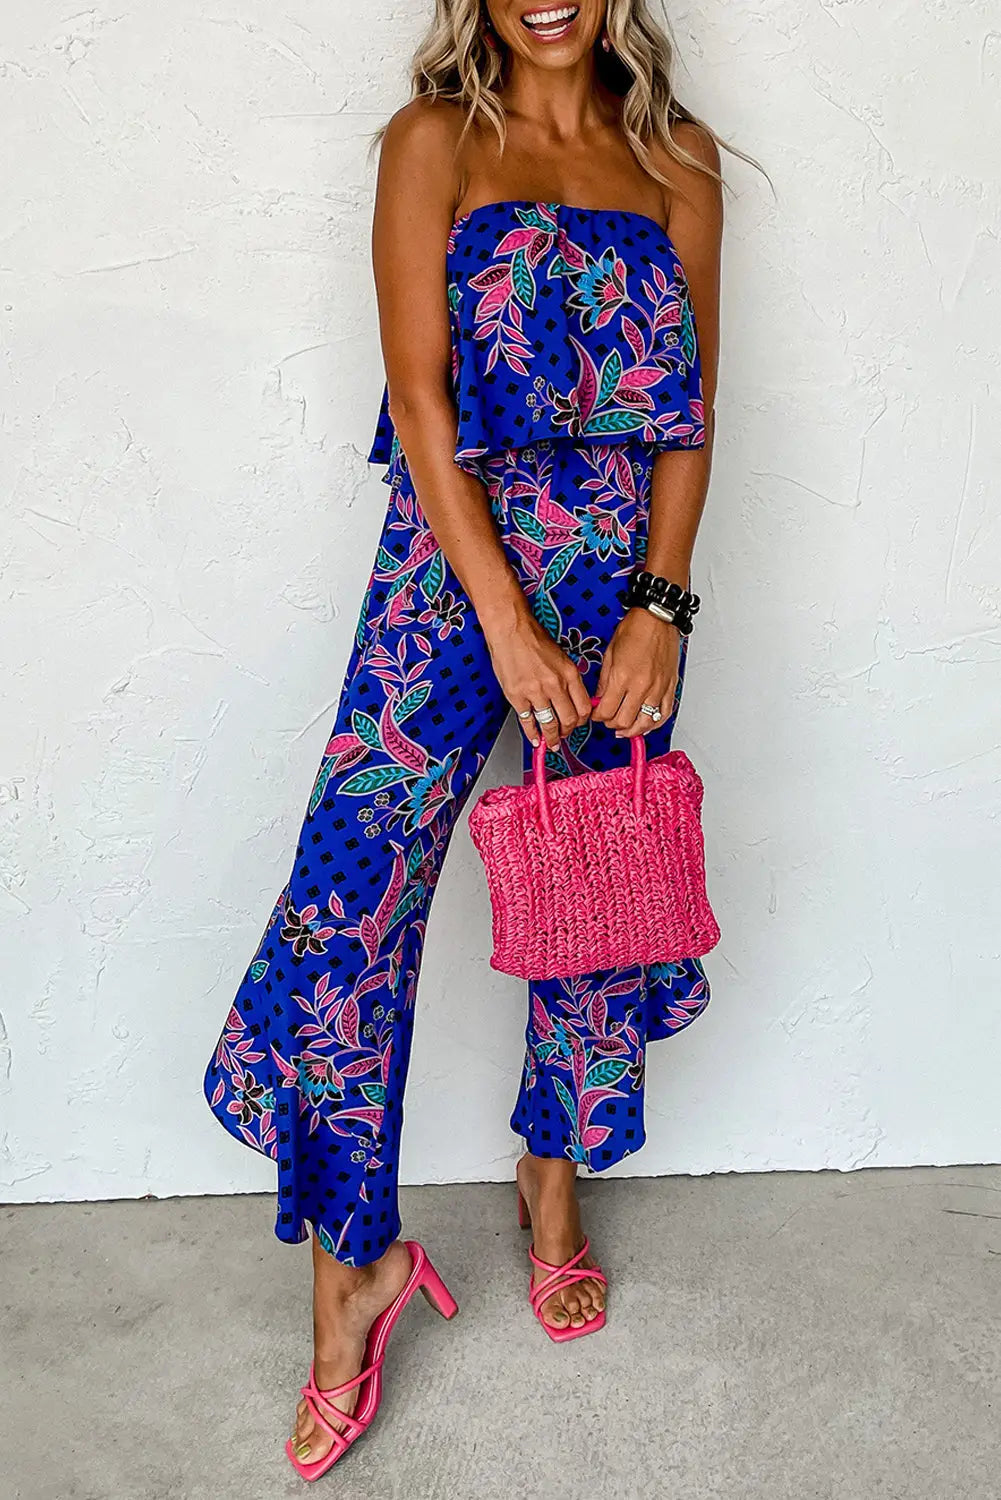 Blue floral strapless ruffled jumpsuit - s / 100% polyester - bottoms/jumpsuits & rompers